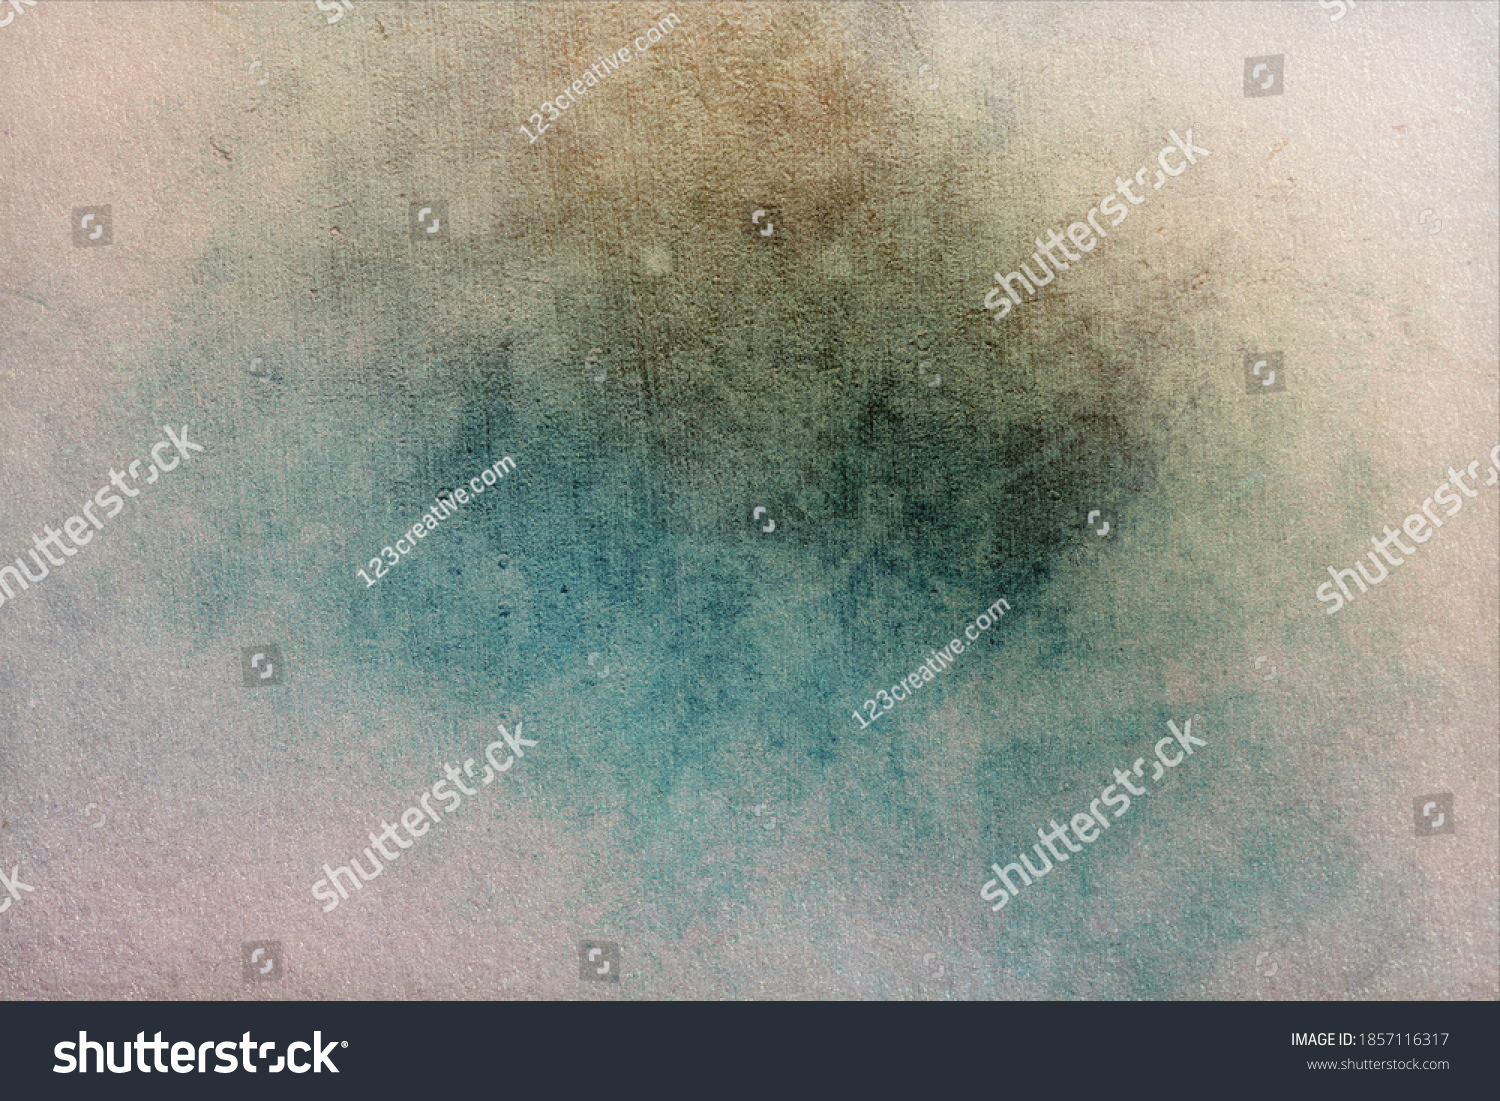 Subtle grunge shabby historic old wall background with stains in faded brown, blue, white colors #1857116317